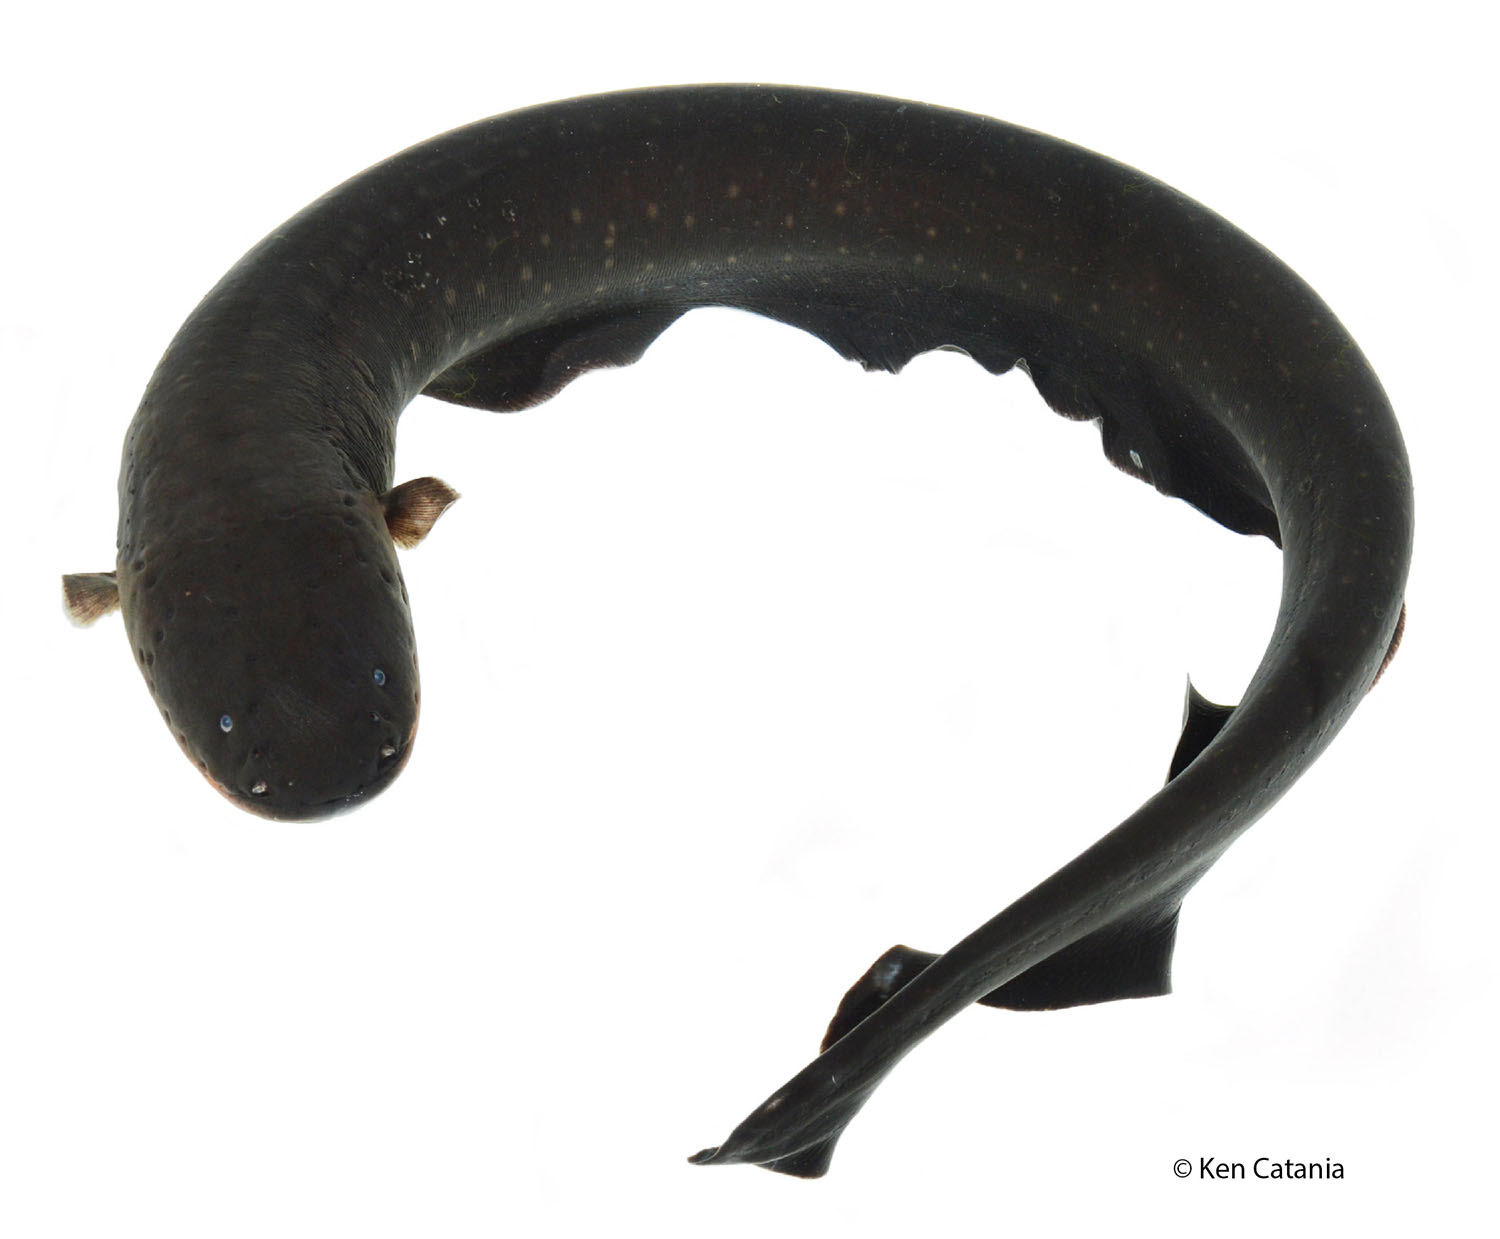 Scientists shocked to discover two new species of electric eel